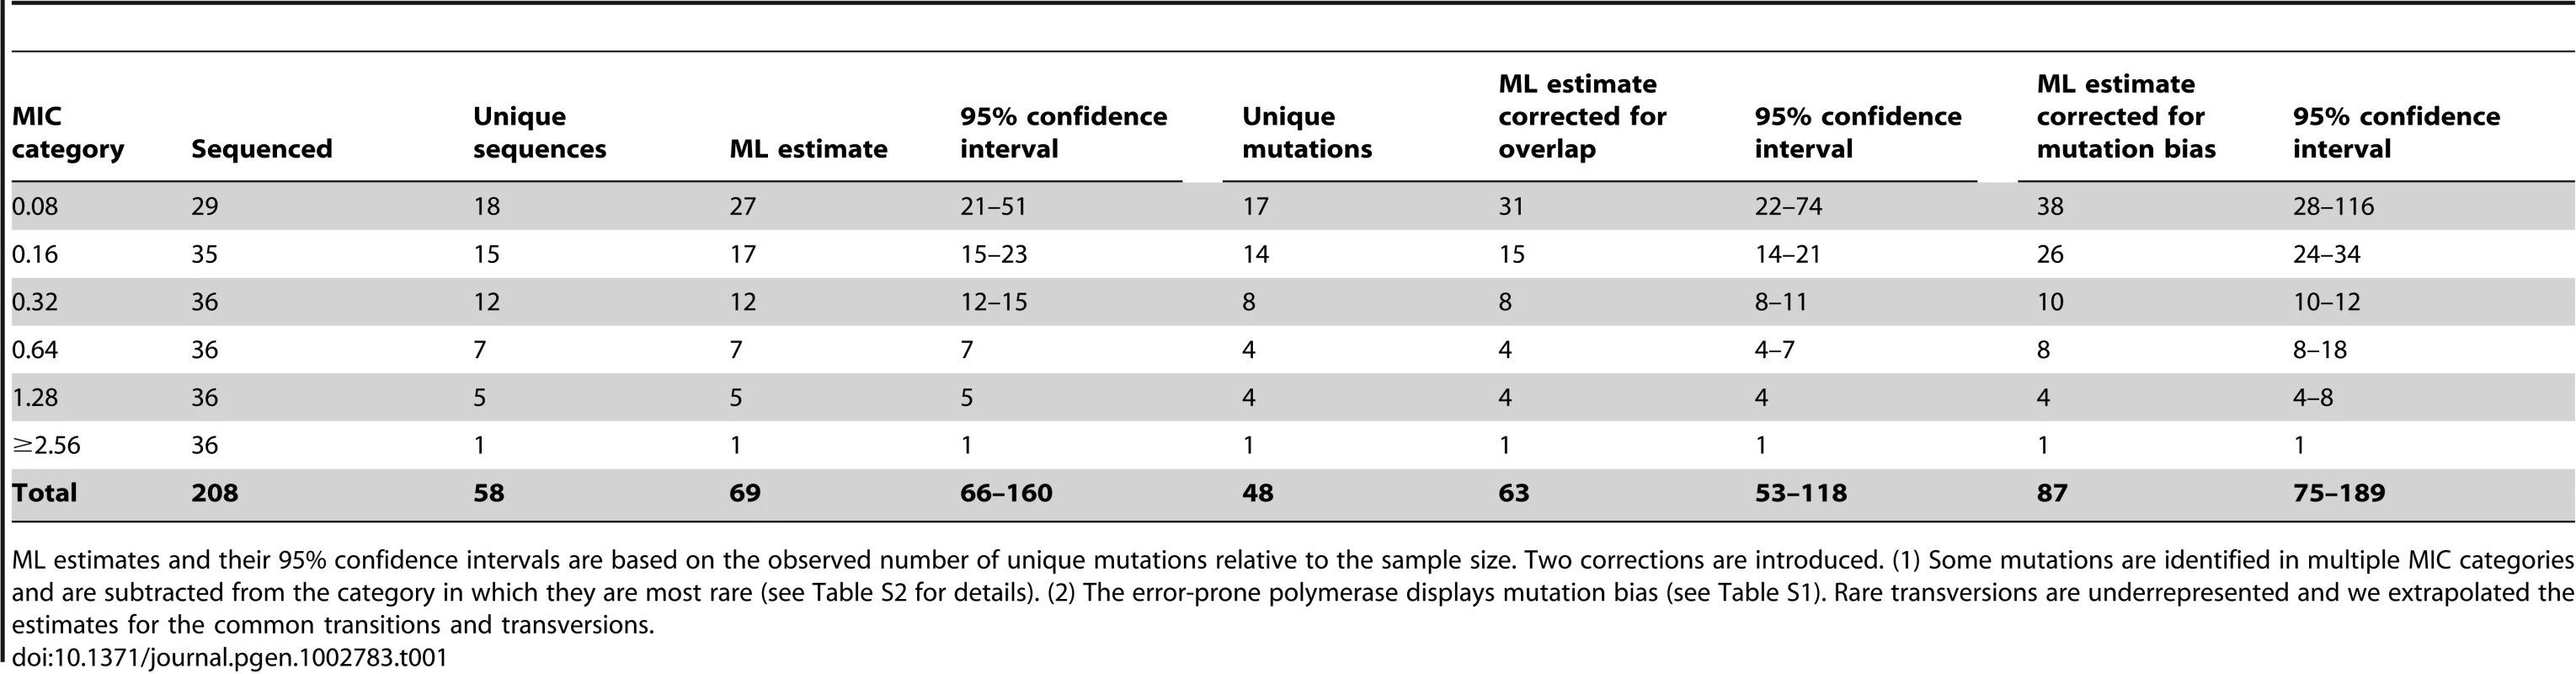 Estimated number of beneficial mutations within each MIC category.